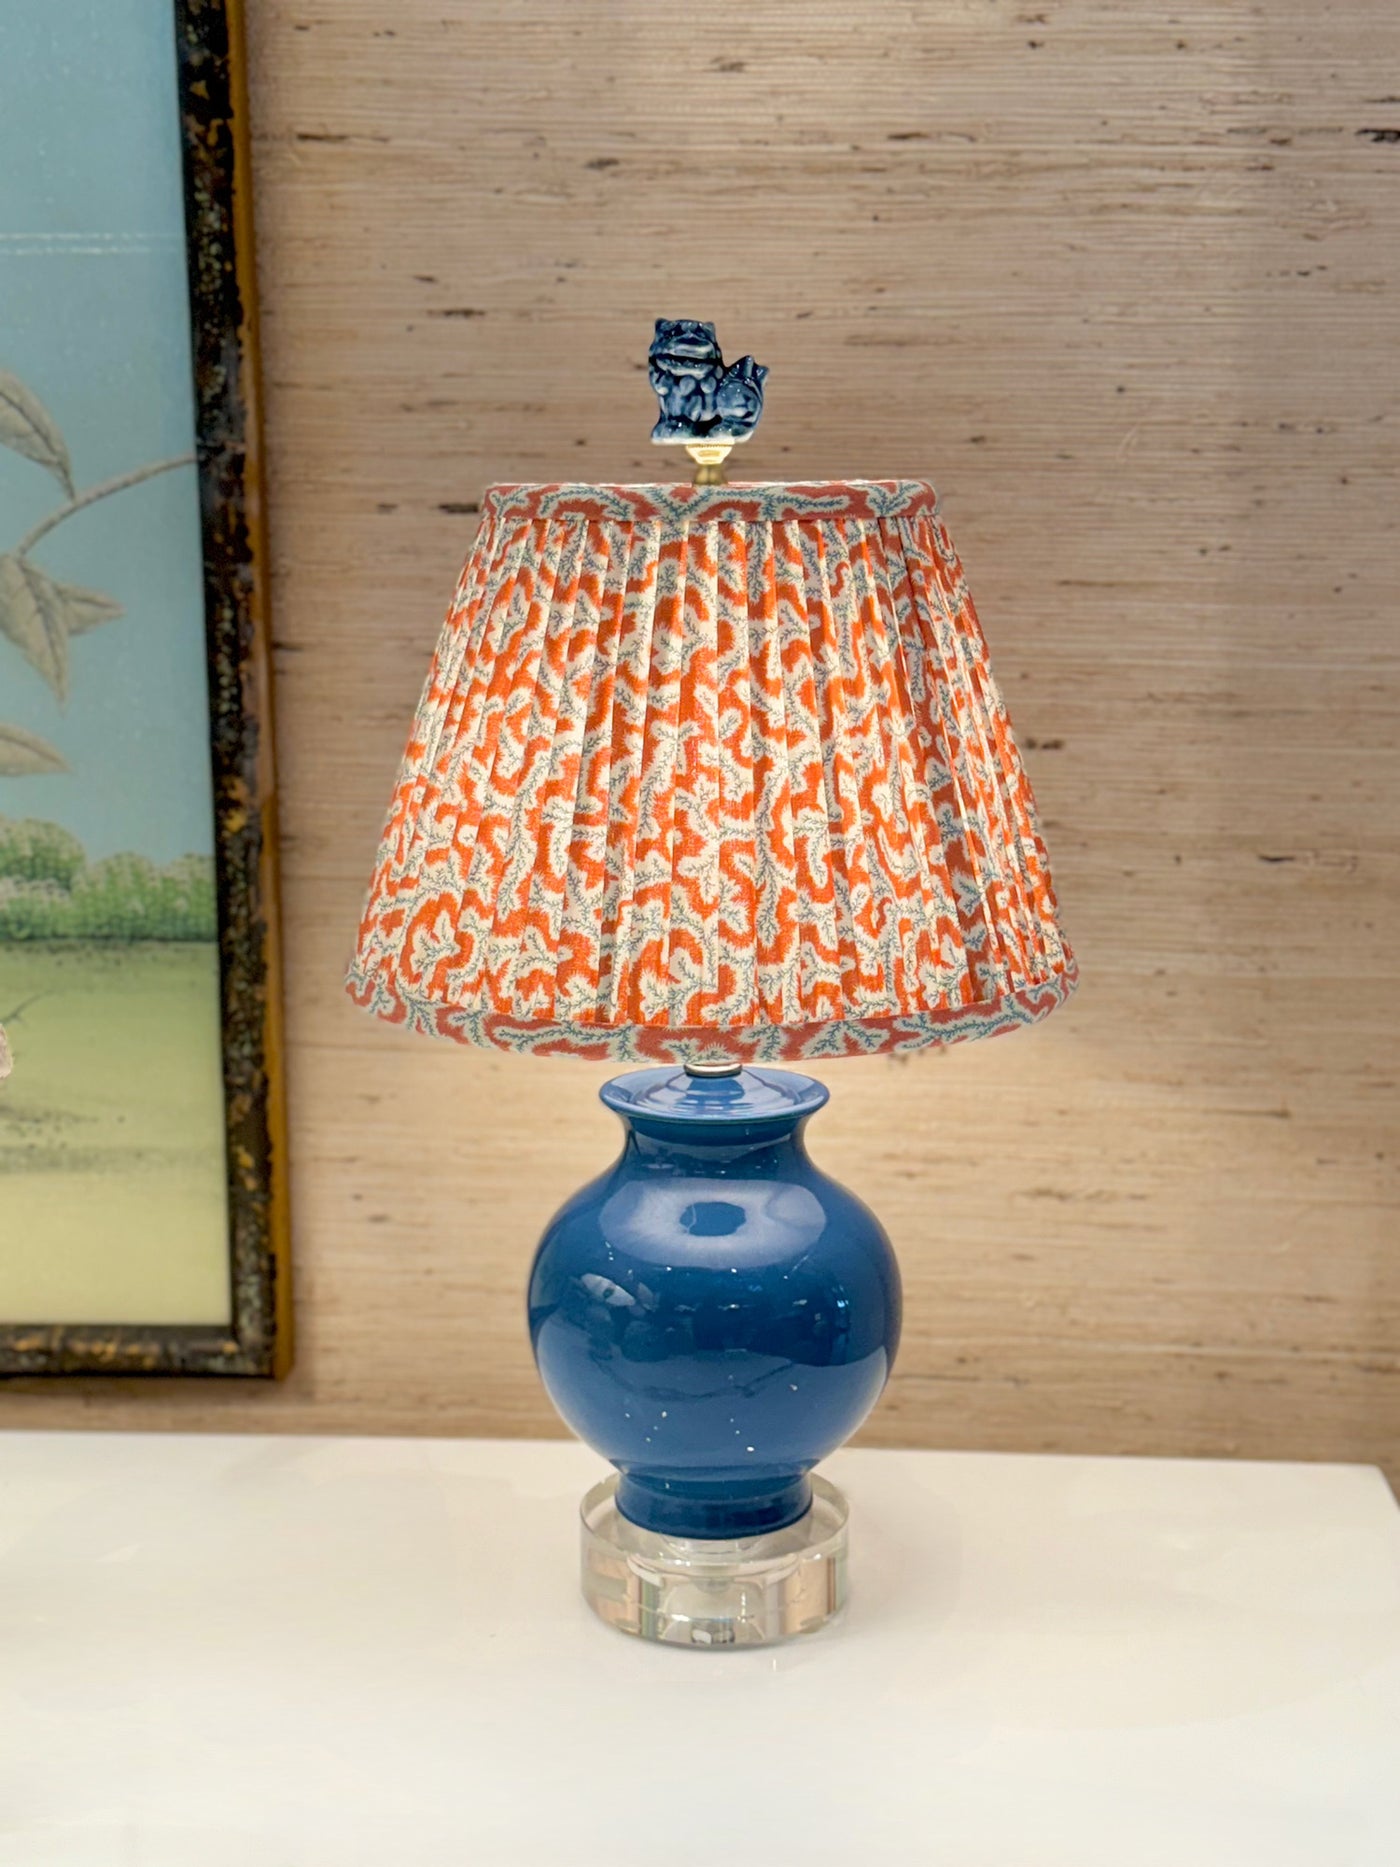 Small blue lamp and Ian Sanderson lampshade